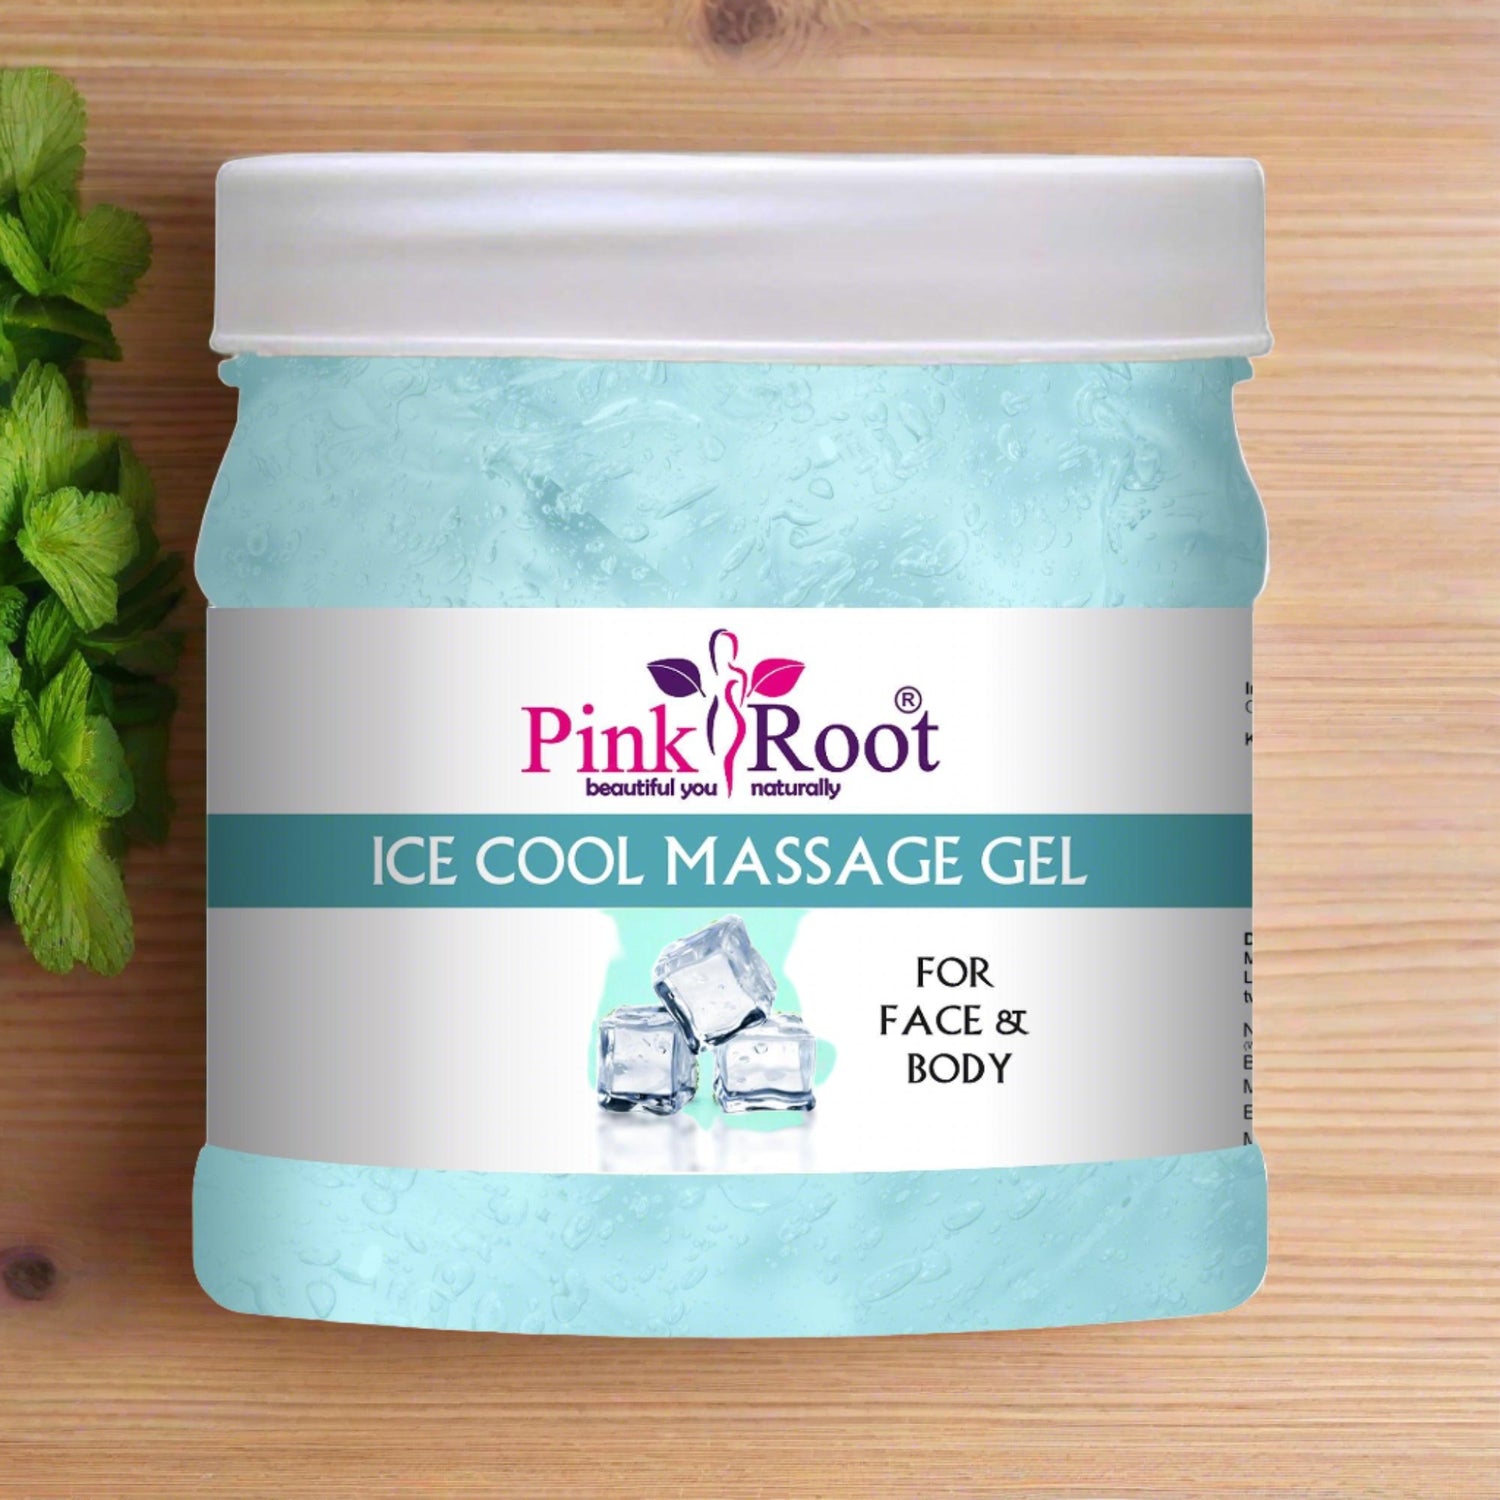 Ice Cool Massage Gel for Scars, Glowing & Radiant Skin Treatment for All Skin Types 500ml - Pink Root